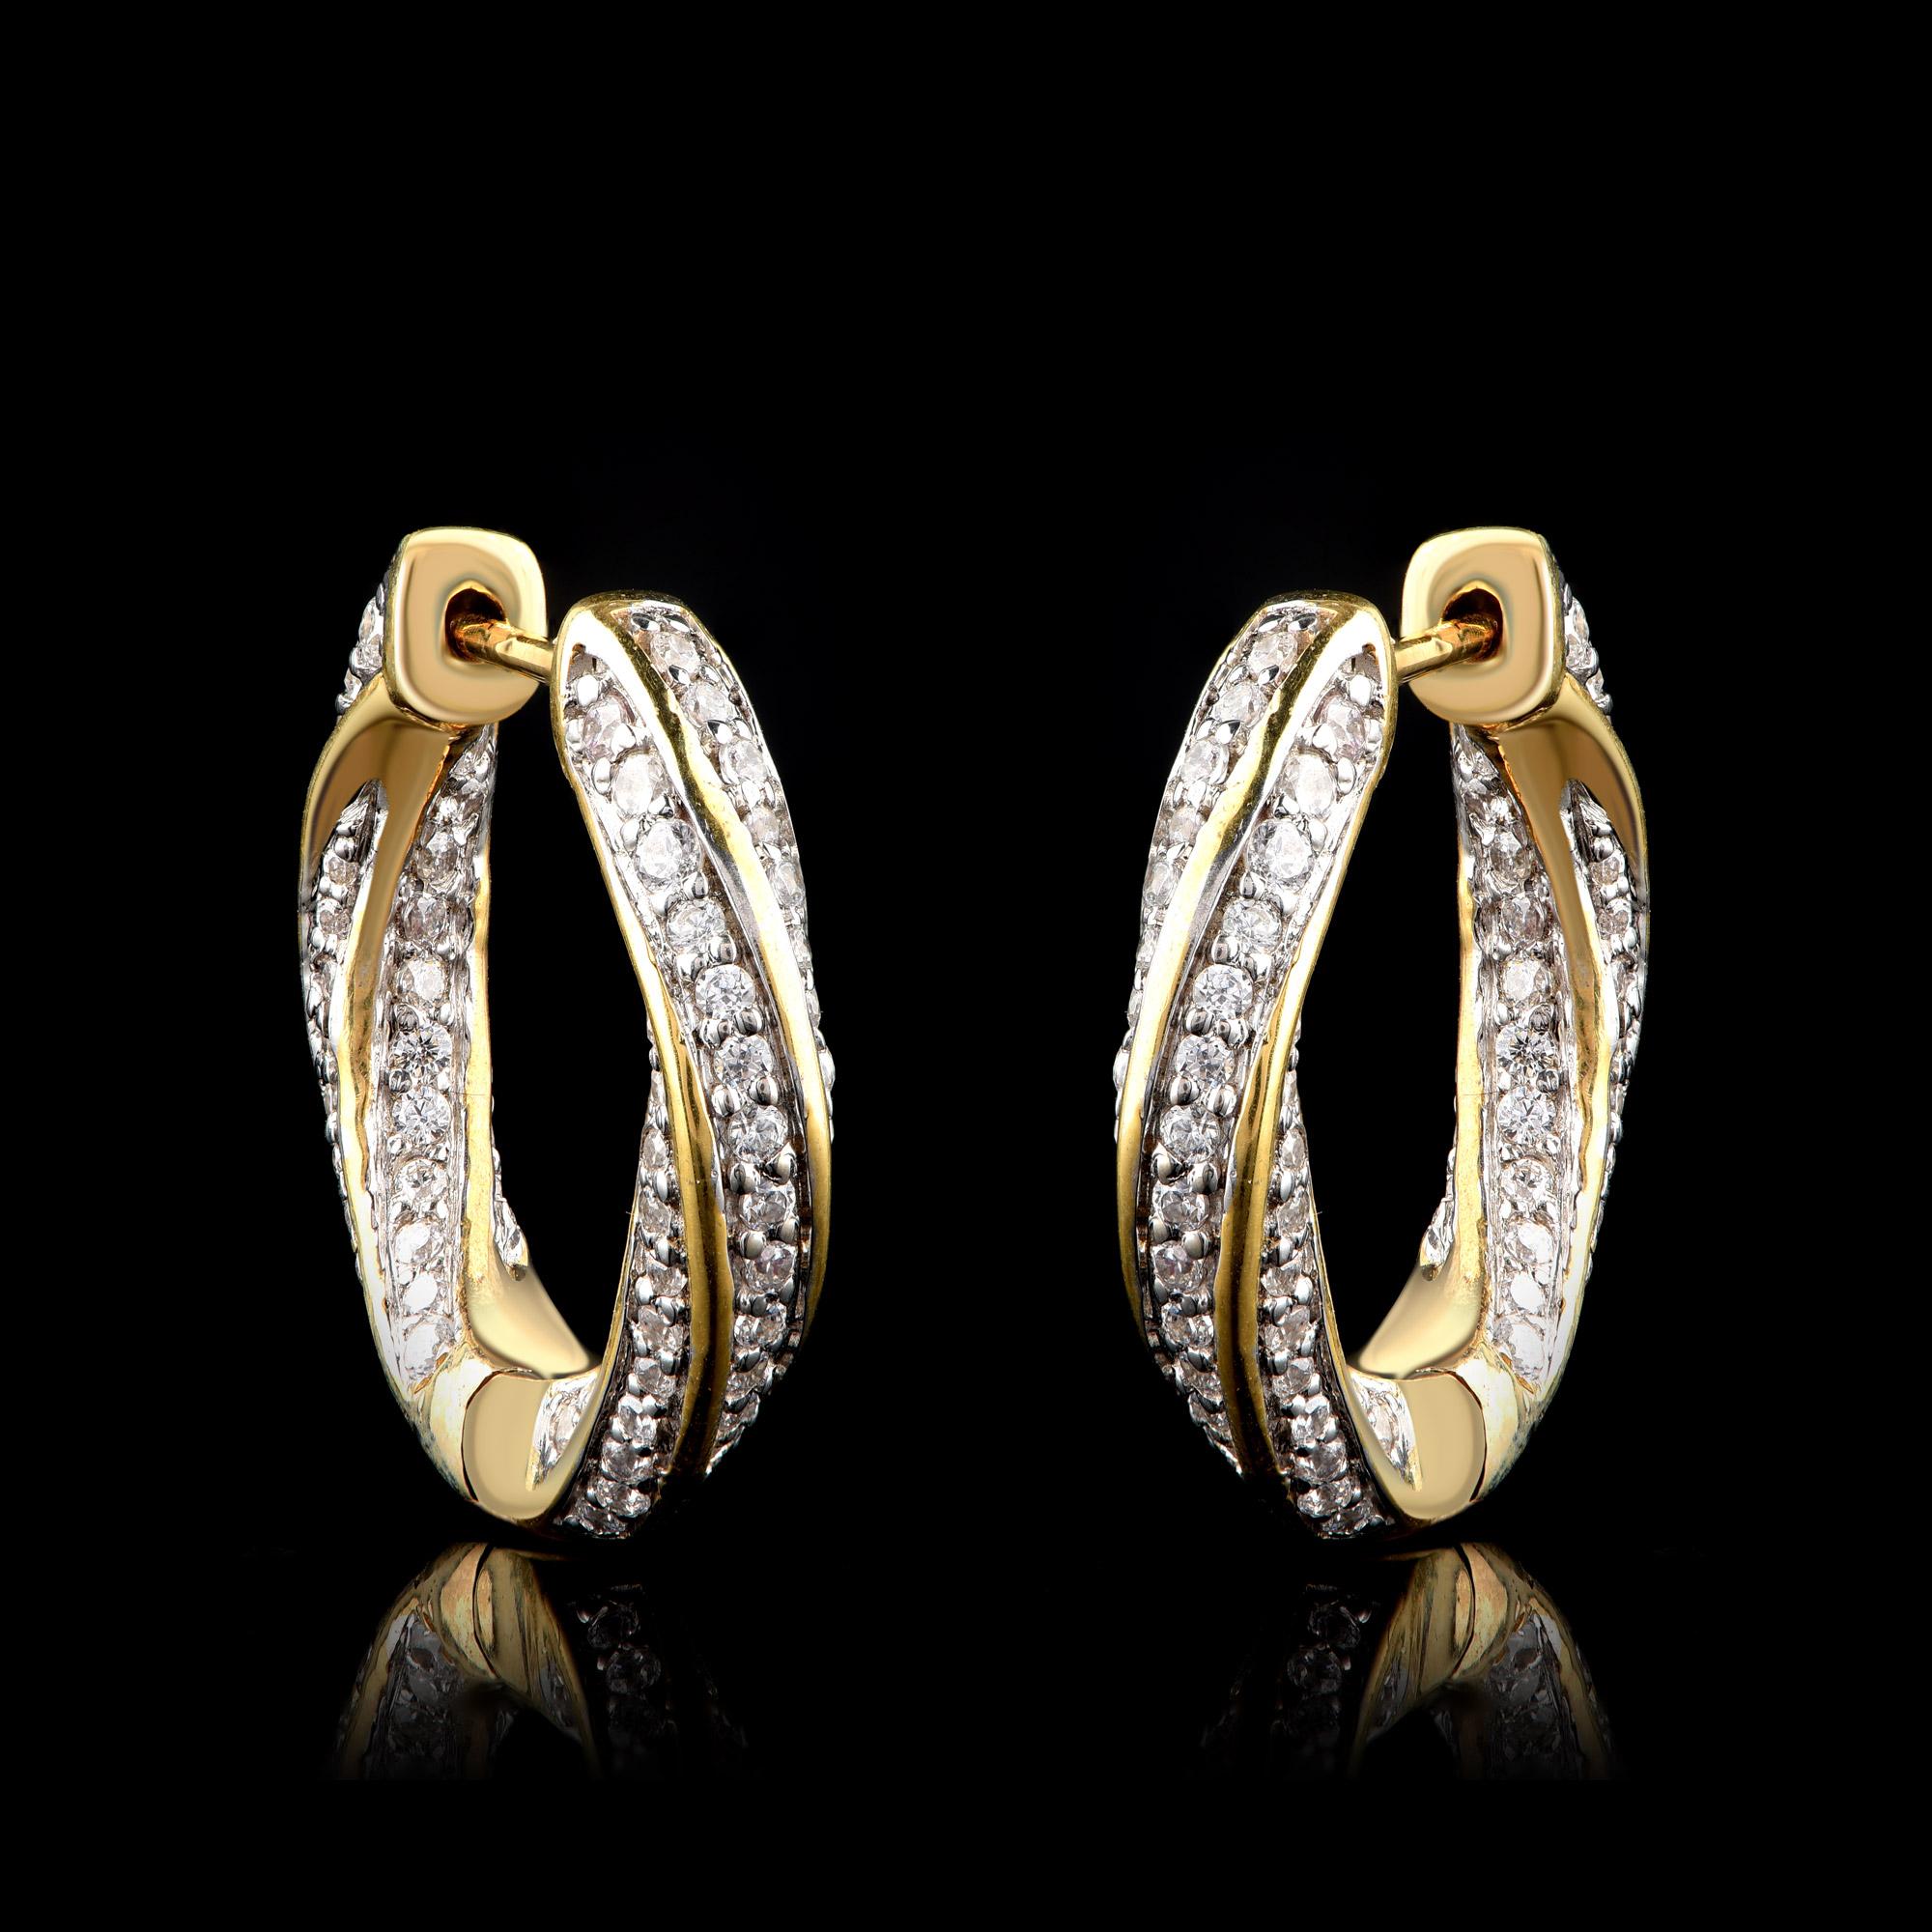 The stunning diamond hoop earrings are studded with 208 brilliant-cut diamonds in pave setting. They are designed in 18-karat yellow gold. The diamonds are graded H-I Color, I2 Clarity.